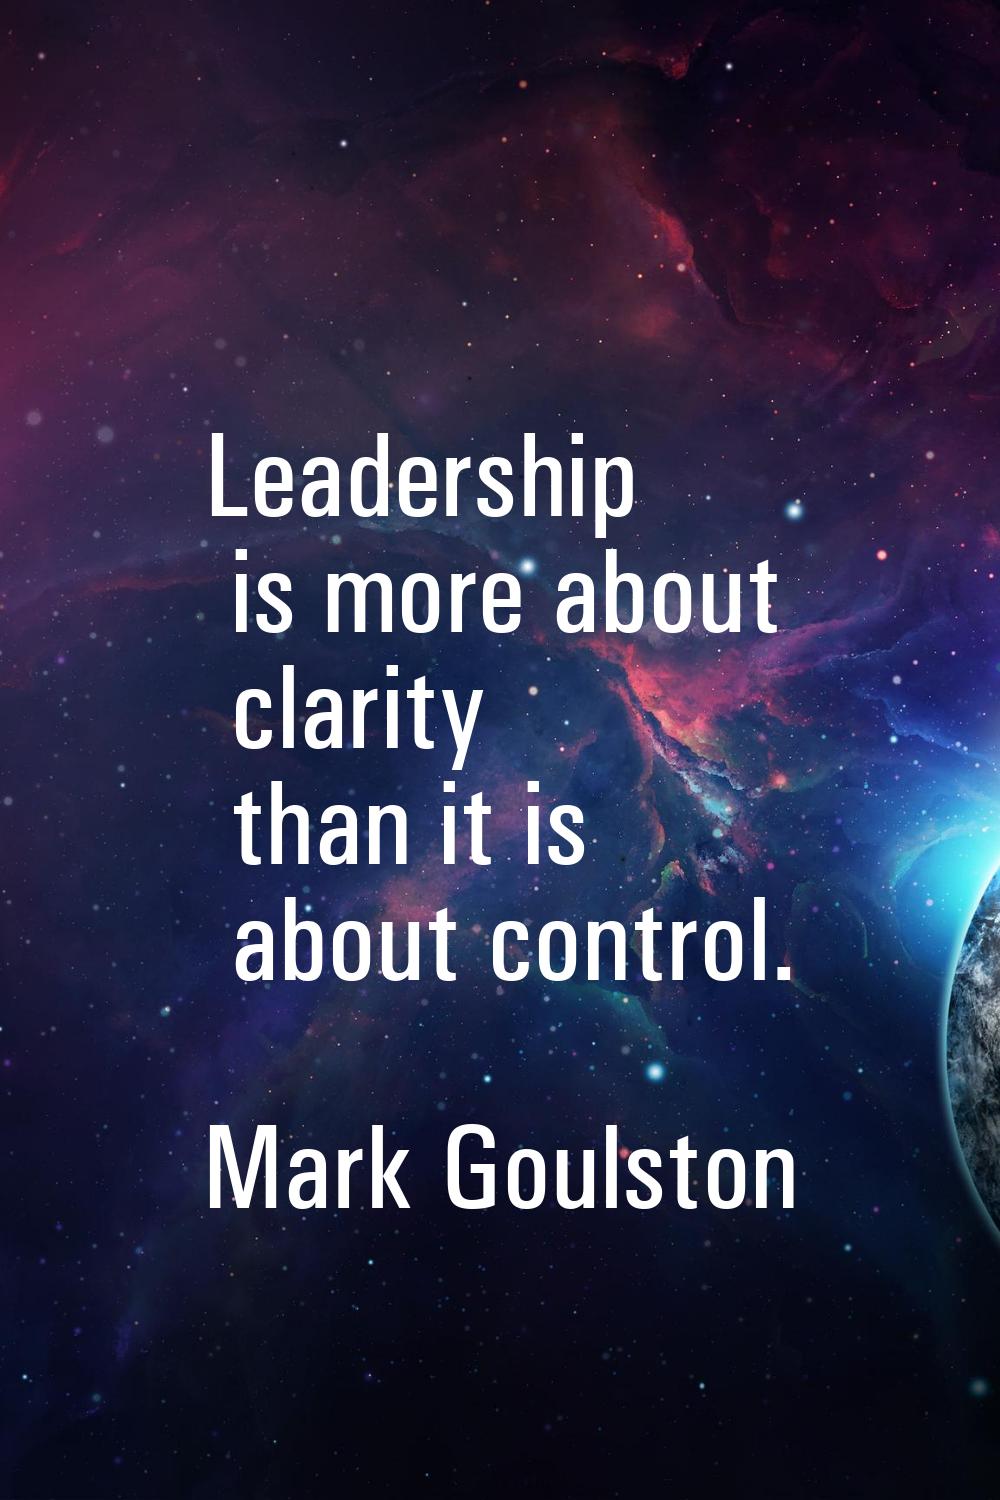 Leadership is more about clarity than it is about control.